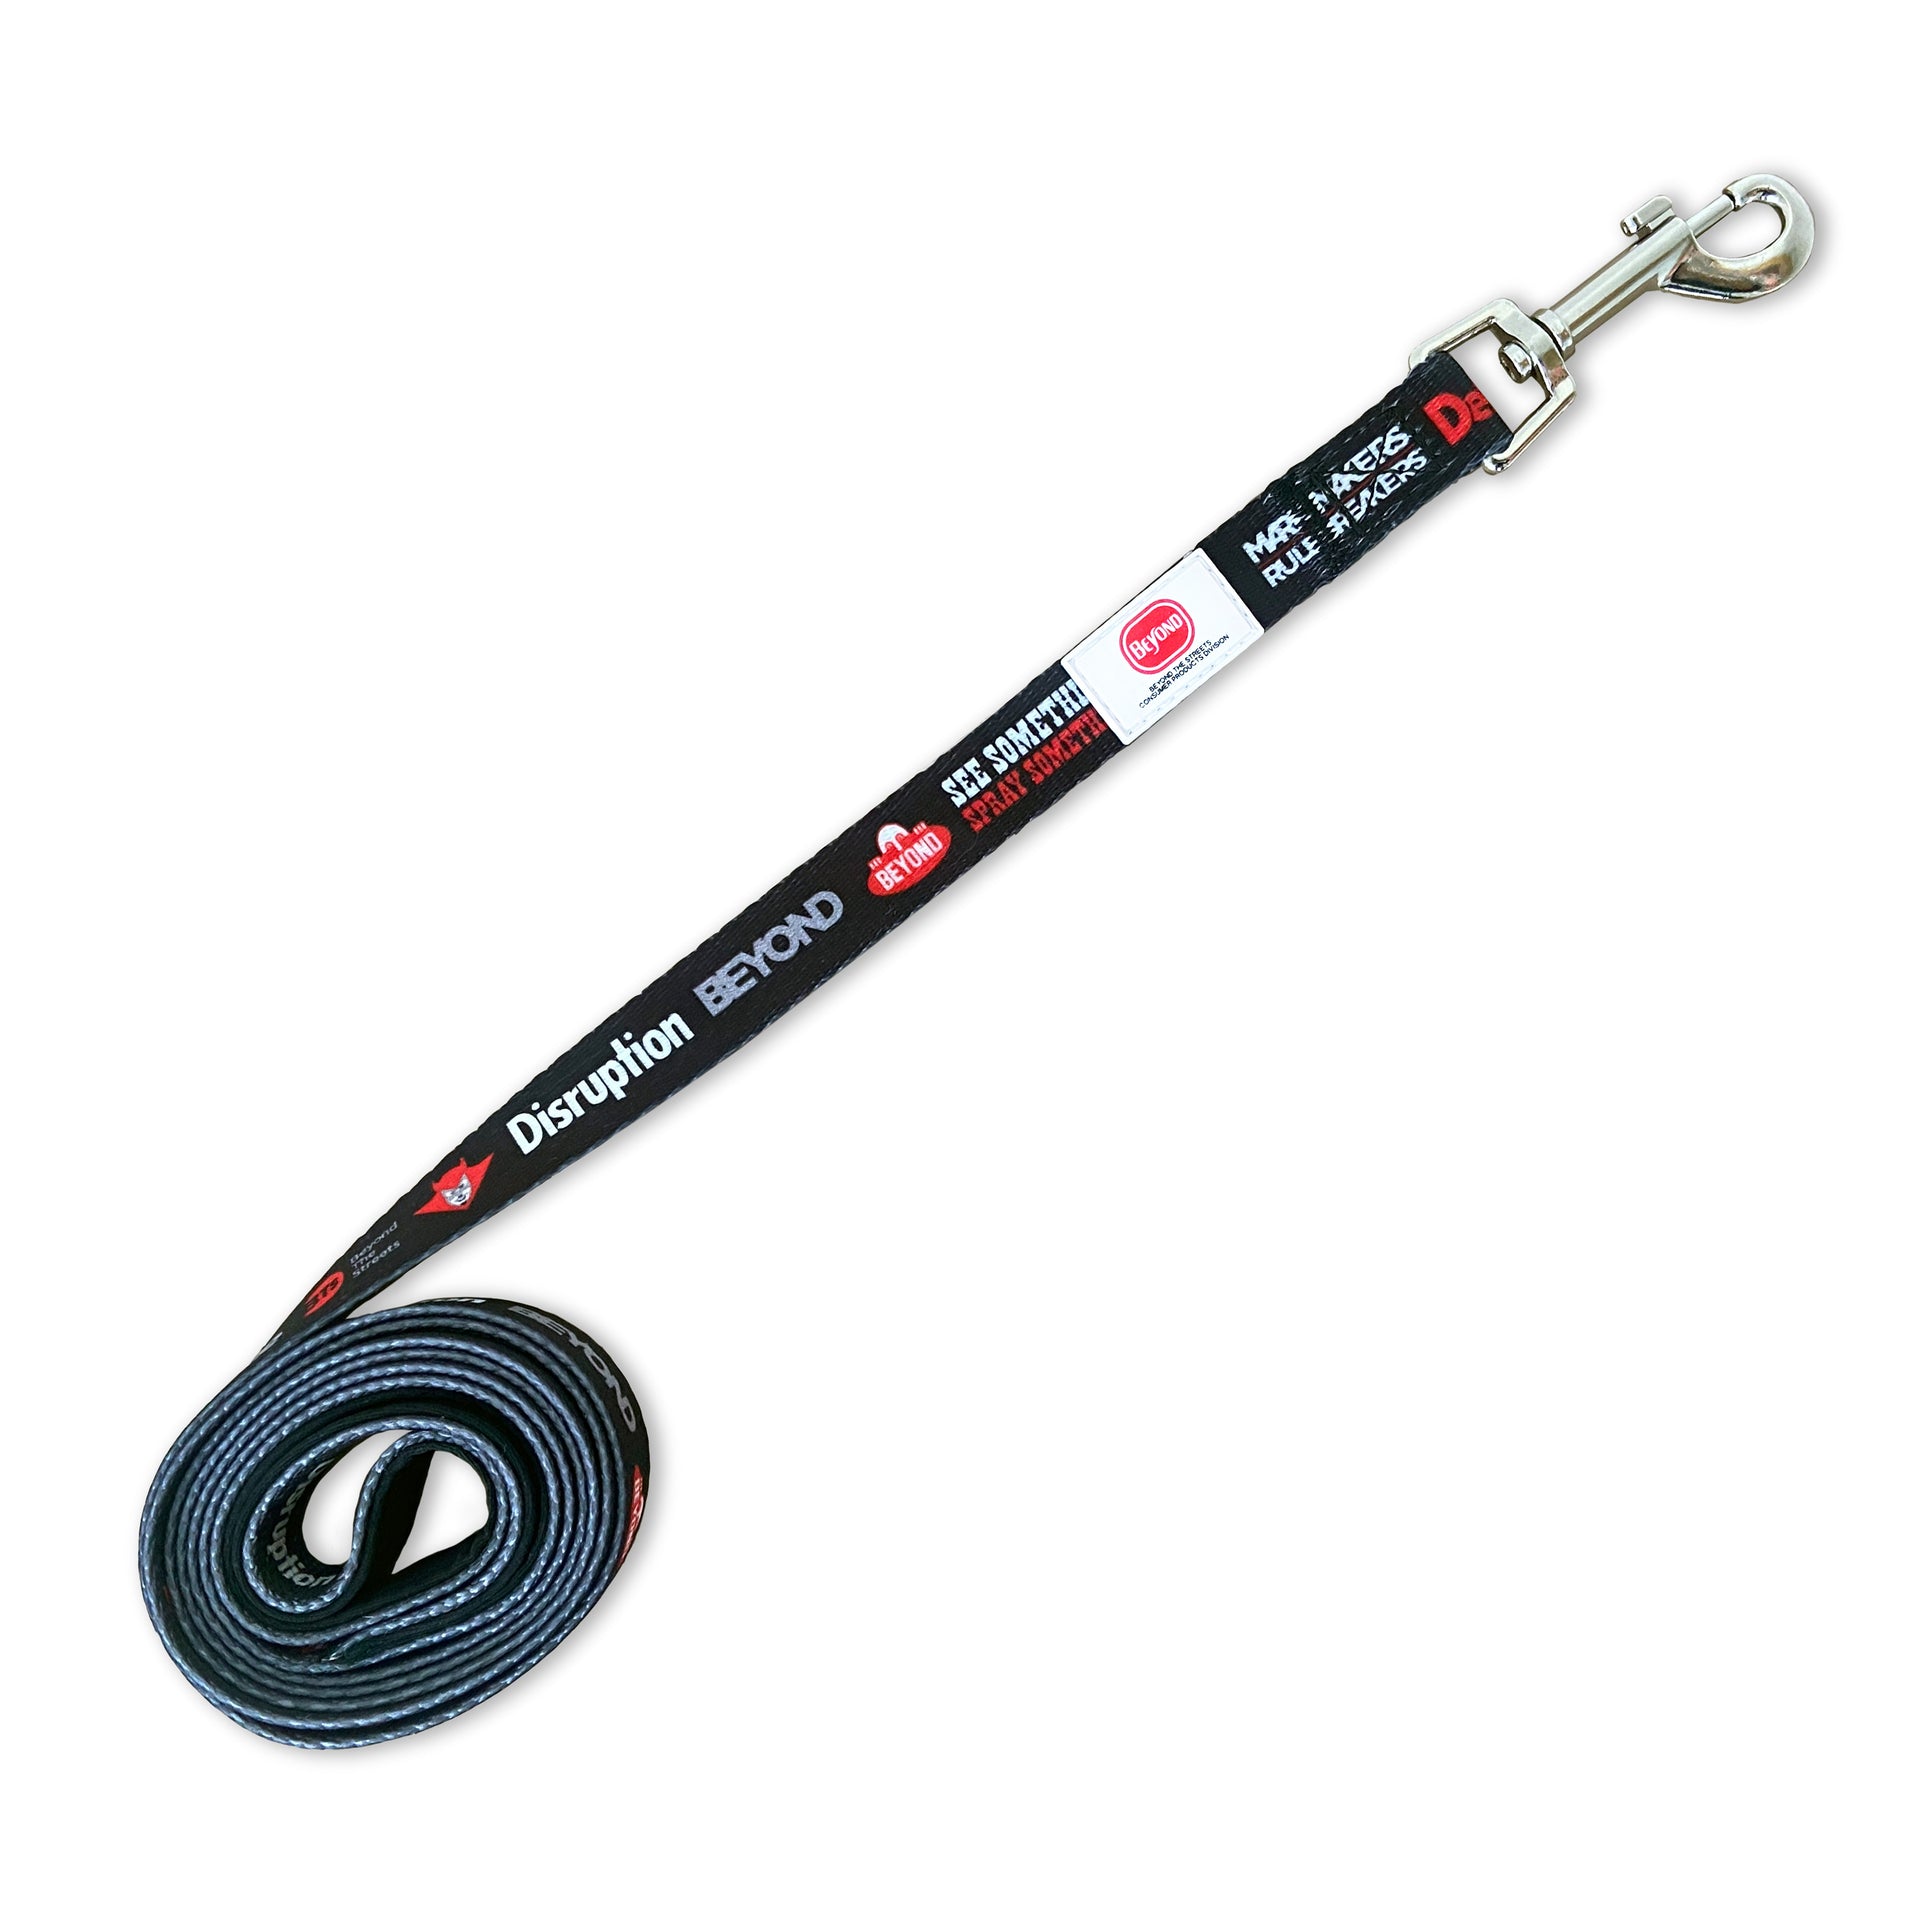 BEYOND THE STREETS "Series 1" Pet Leash